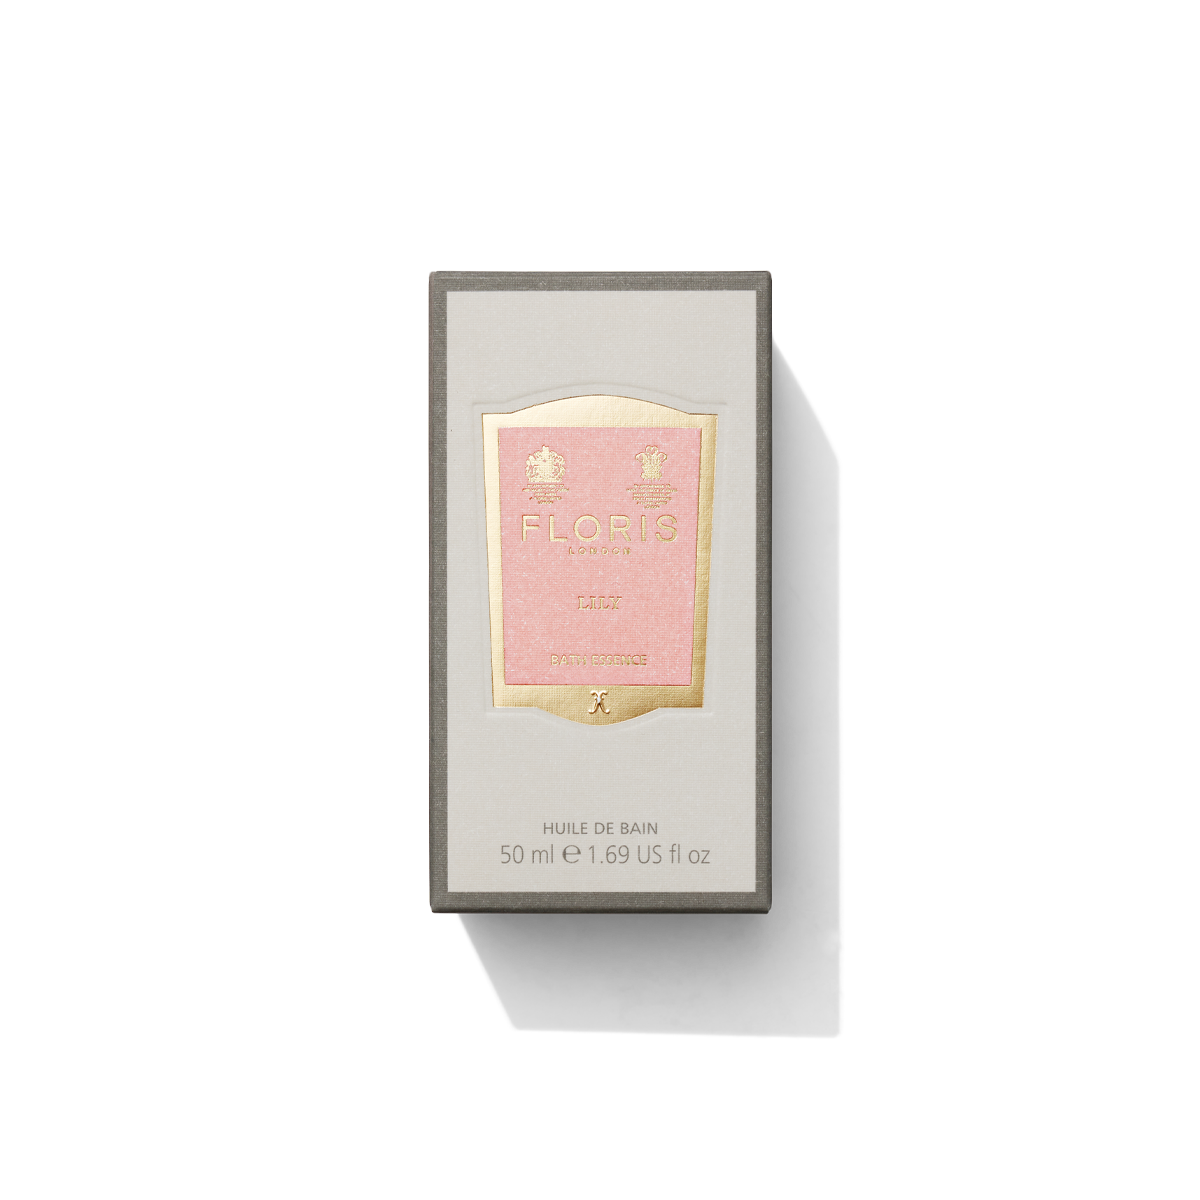 Medium grey box with light pink and gold label containing Lily Bath Essence 